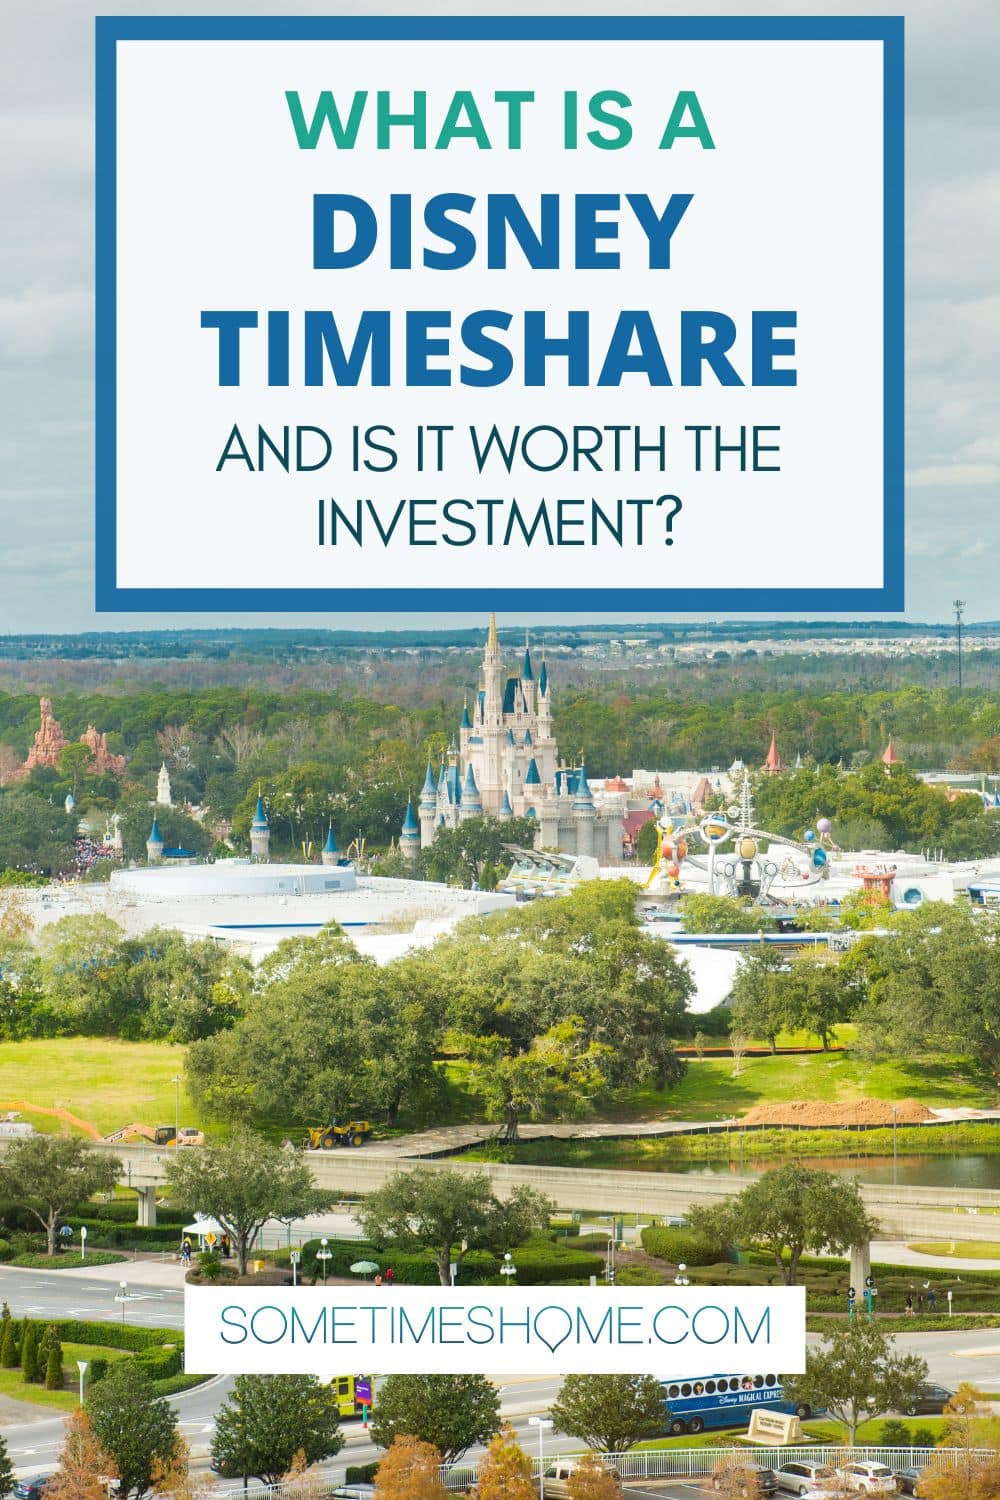 Aerial photo of Walt Disney World Magic Kingdom with the words "What is a Disney Timeshare and is it Worth the Investment? on it. 